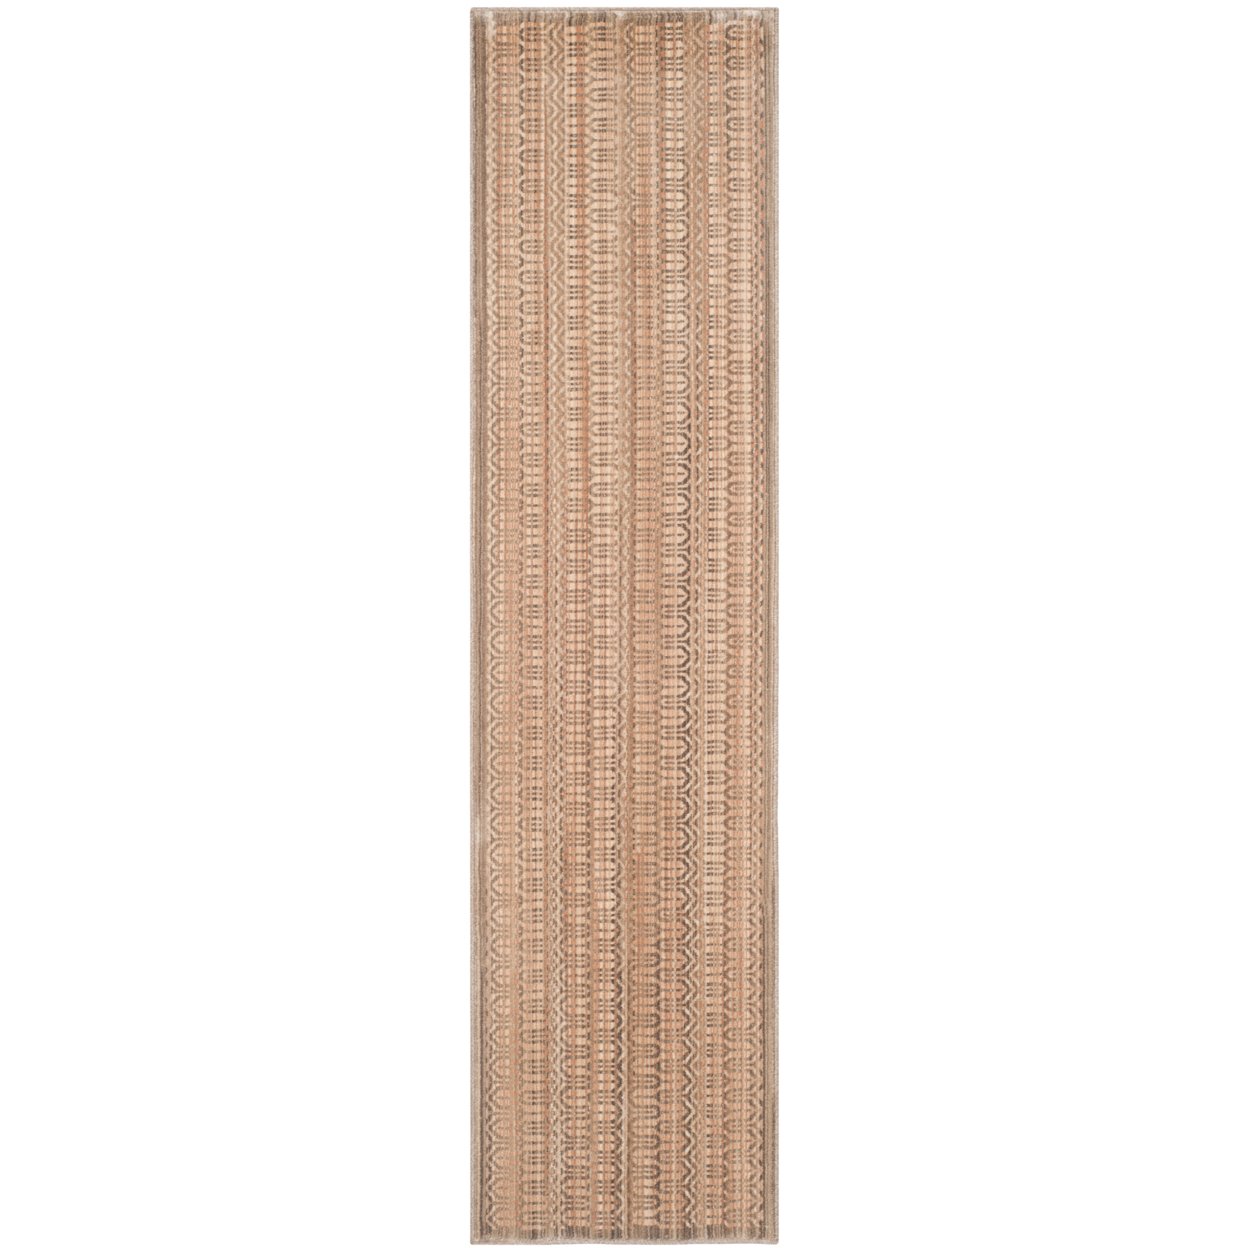 SAFAVIEH Infinity Collection INF583T Beige / Taupe Rug - 9' X 12'